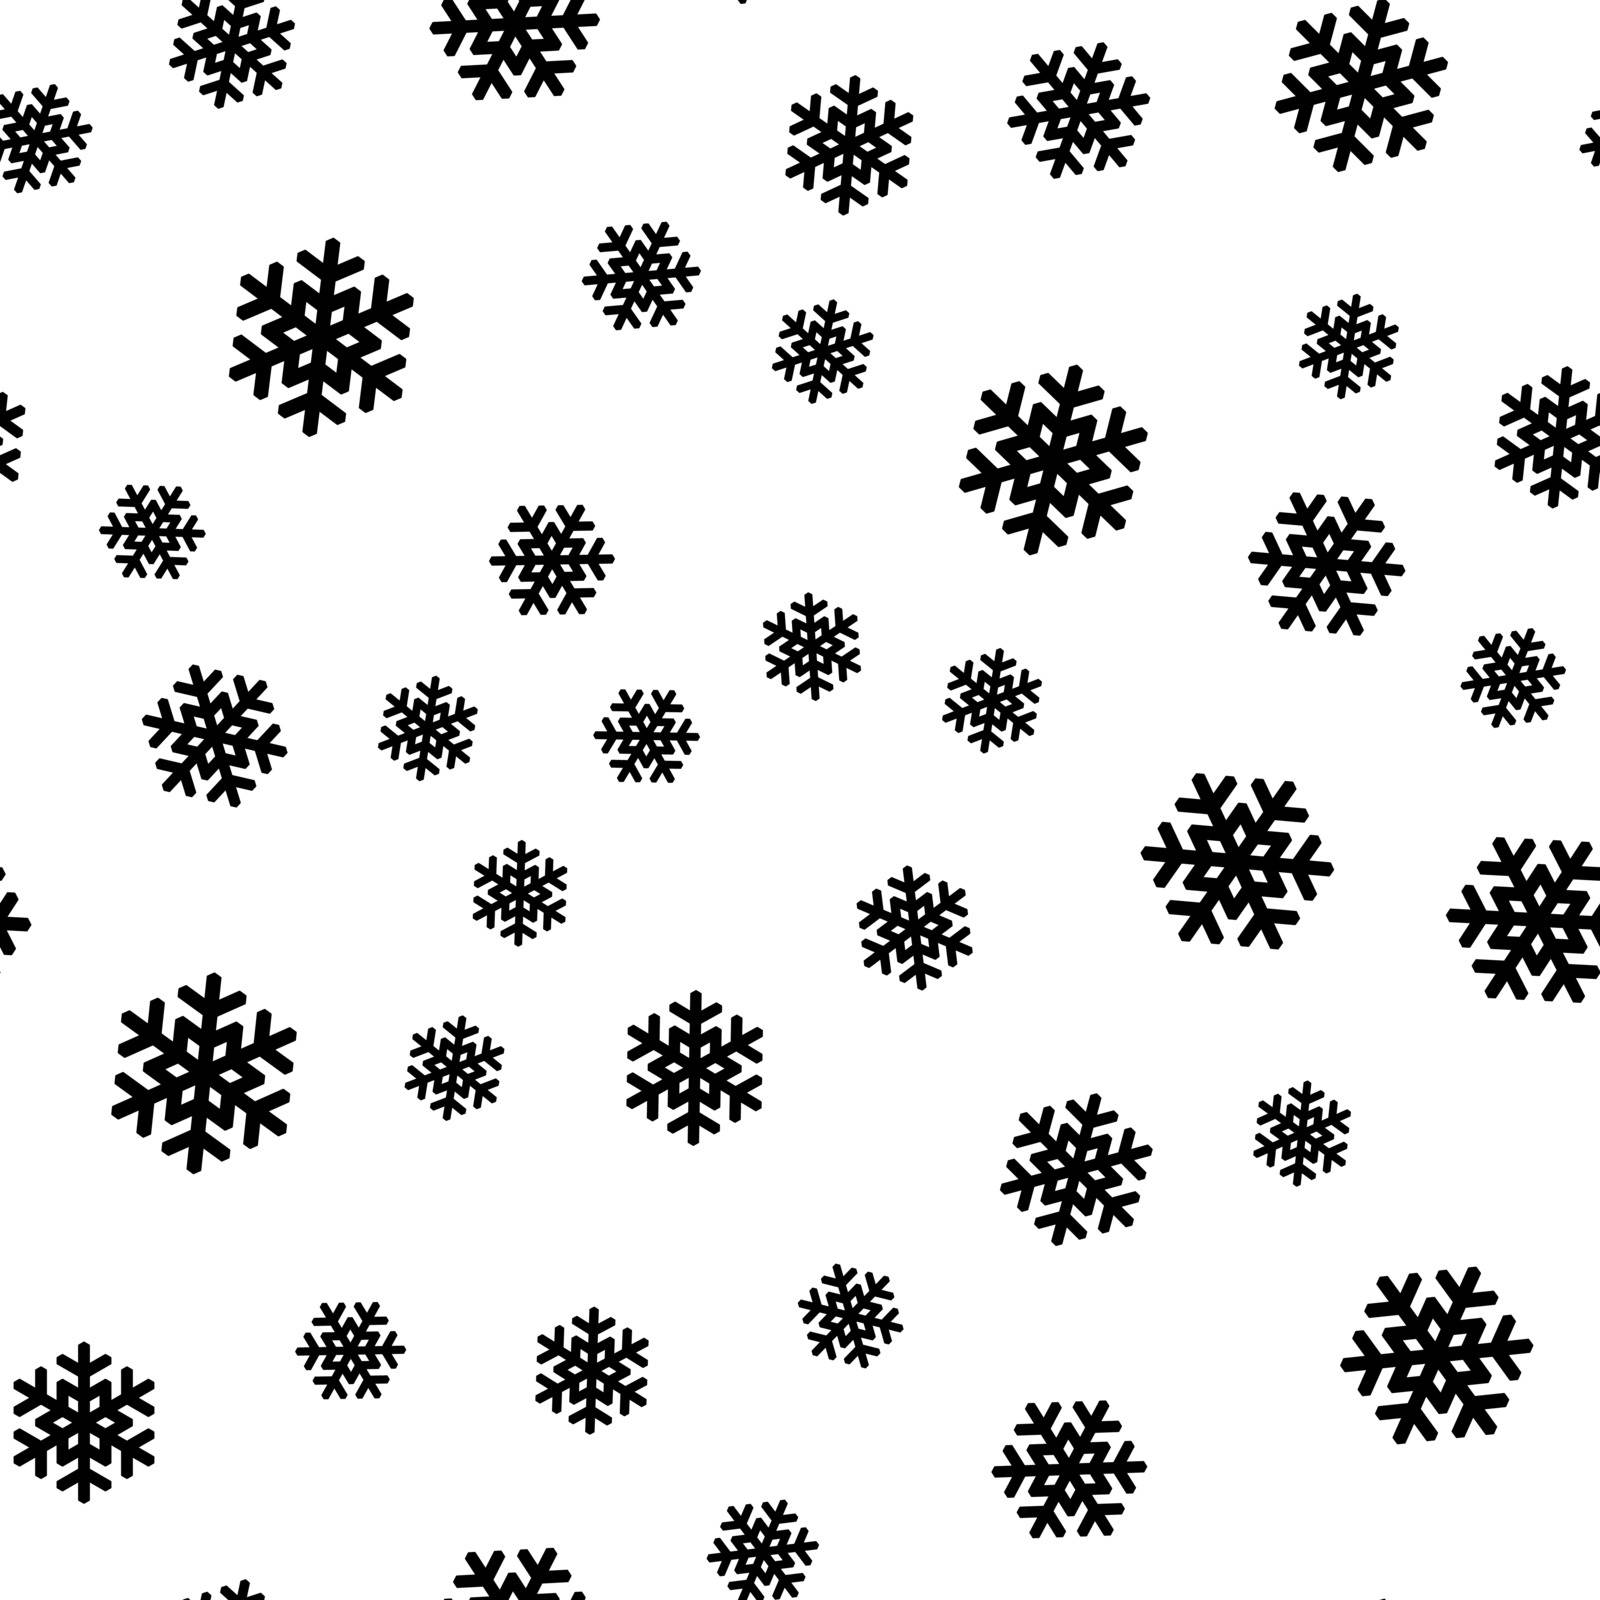 It is snowing. Seamless pattern of snowflakes. Christmas or winter theme vector background.